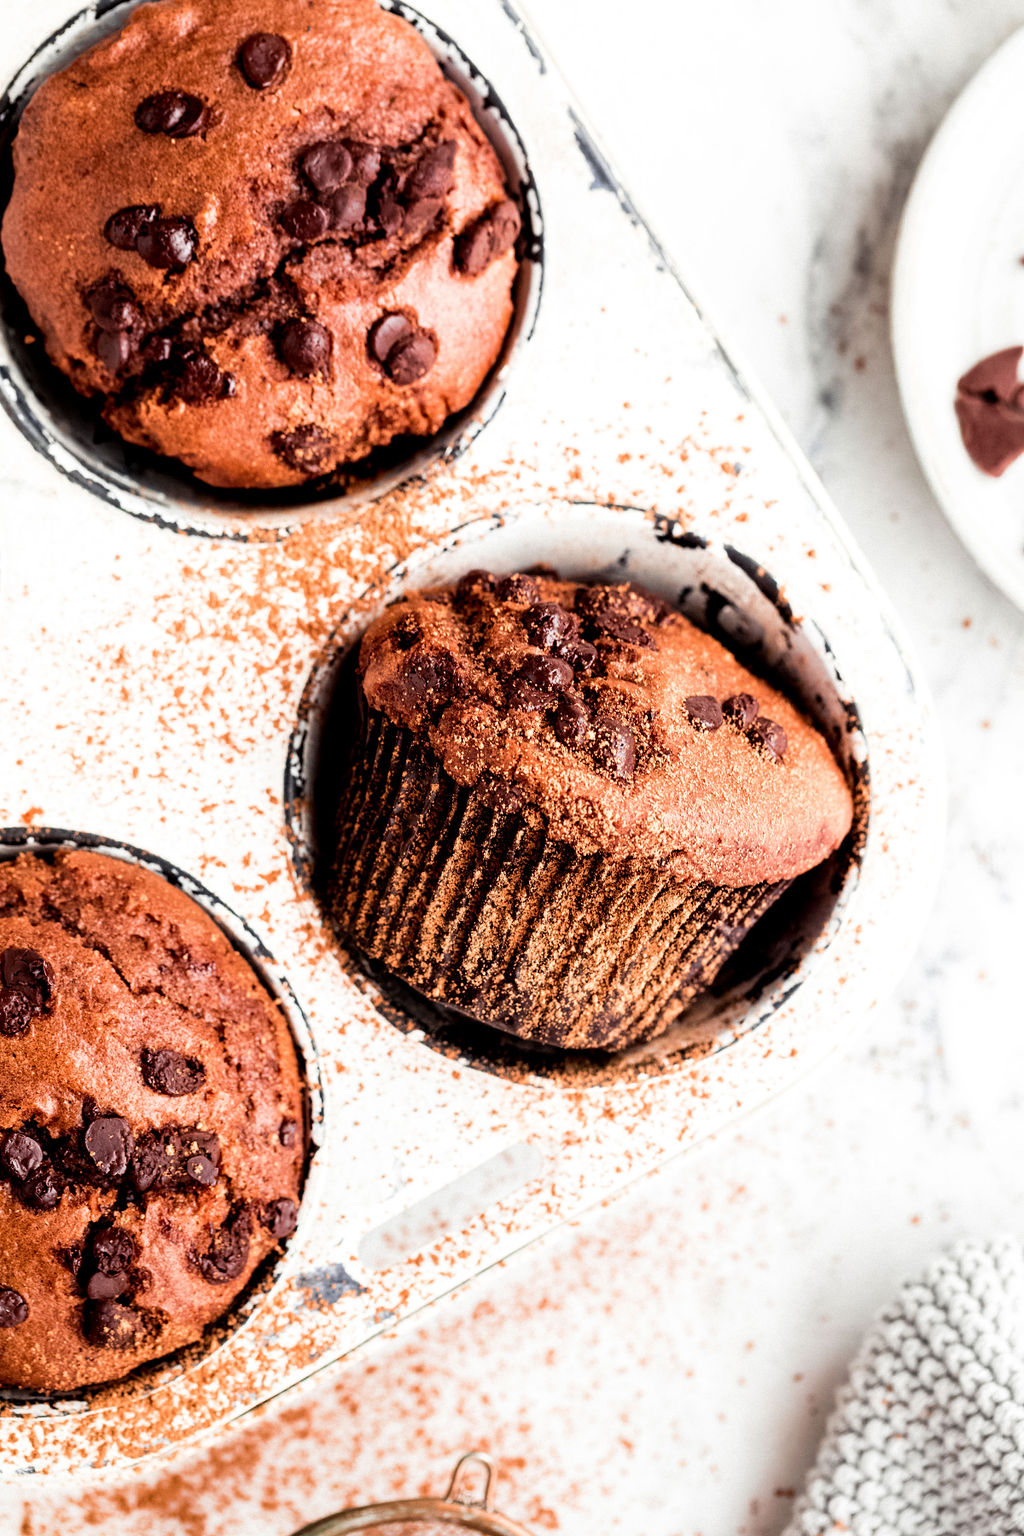 A trio of delicious choc chip muffins straight out of the oven